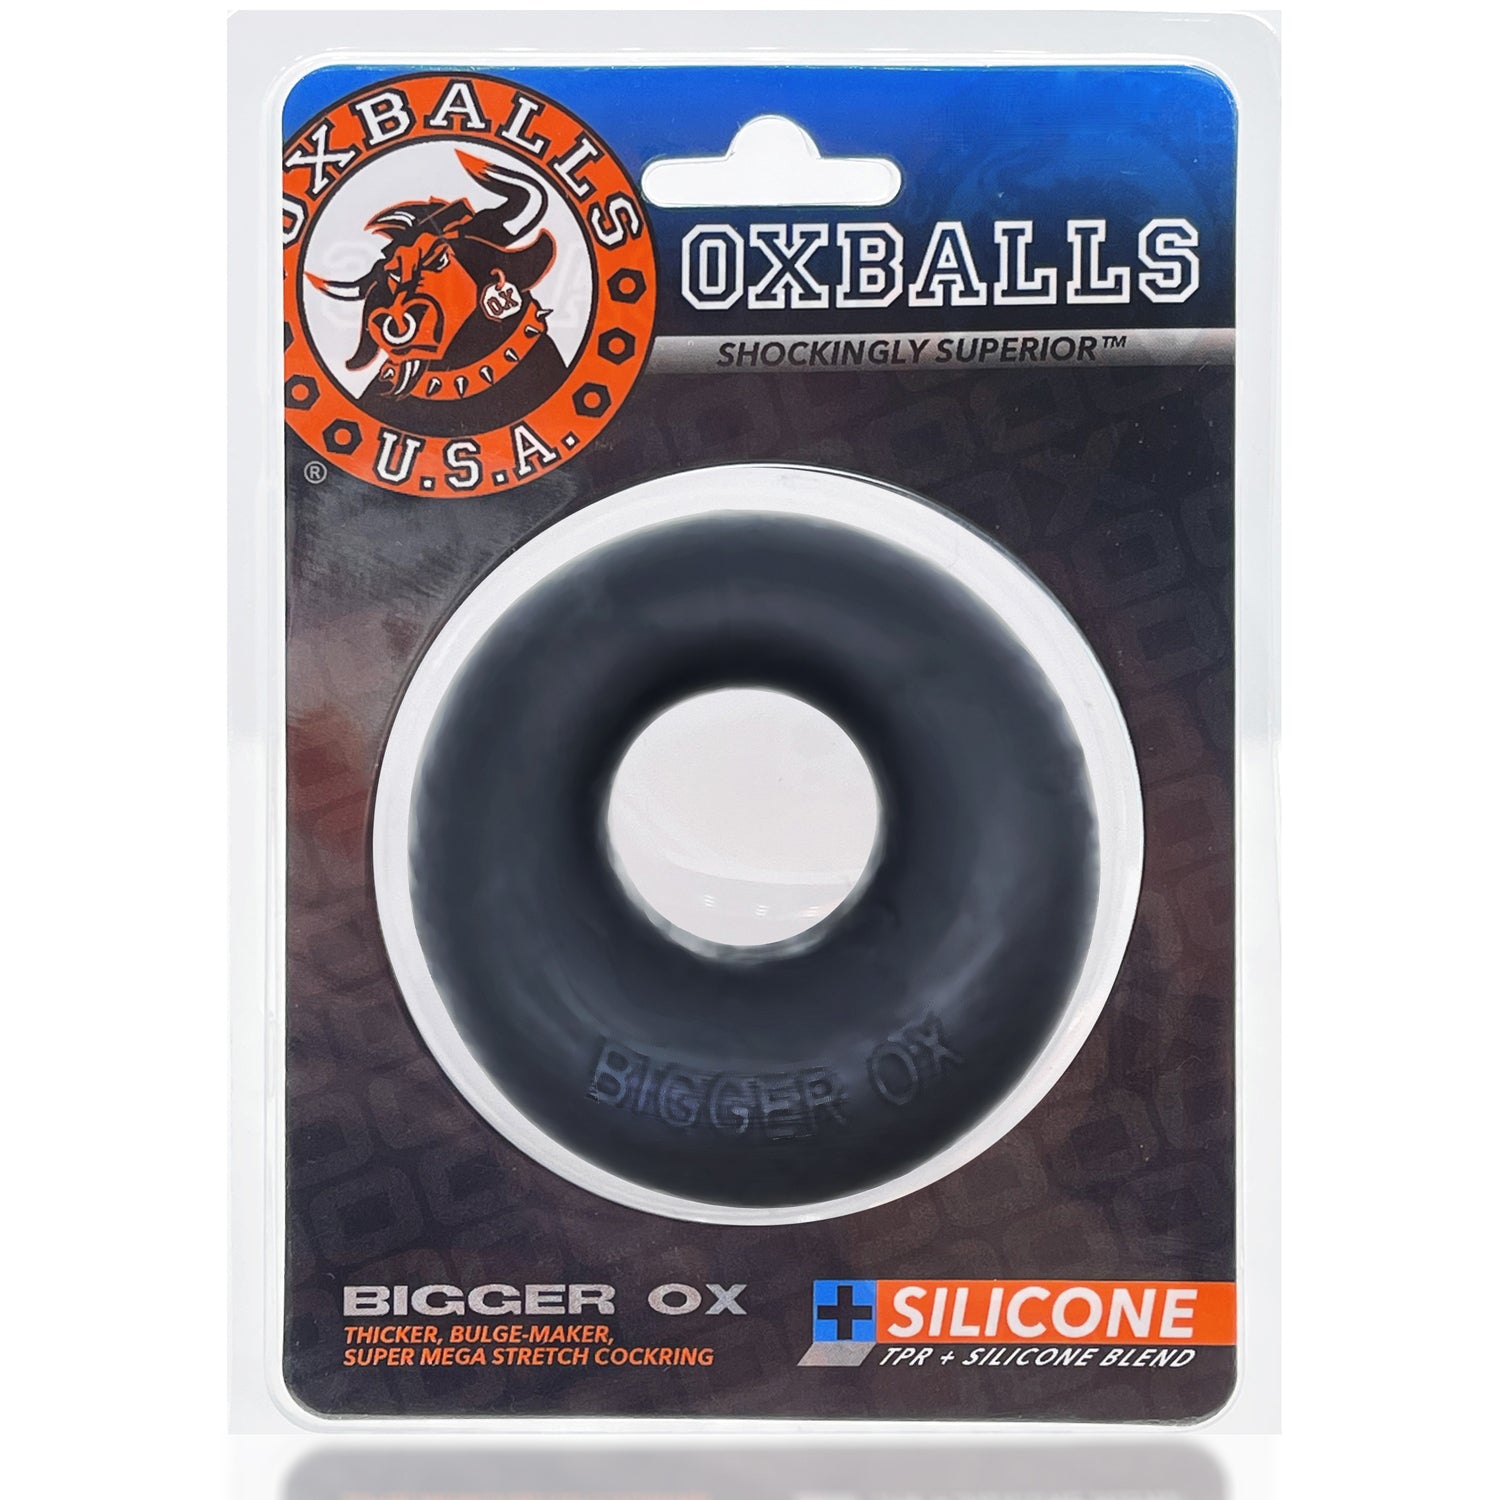 Oxballs Bigger Ox Space Blue Cock Ring